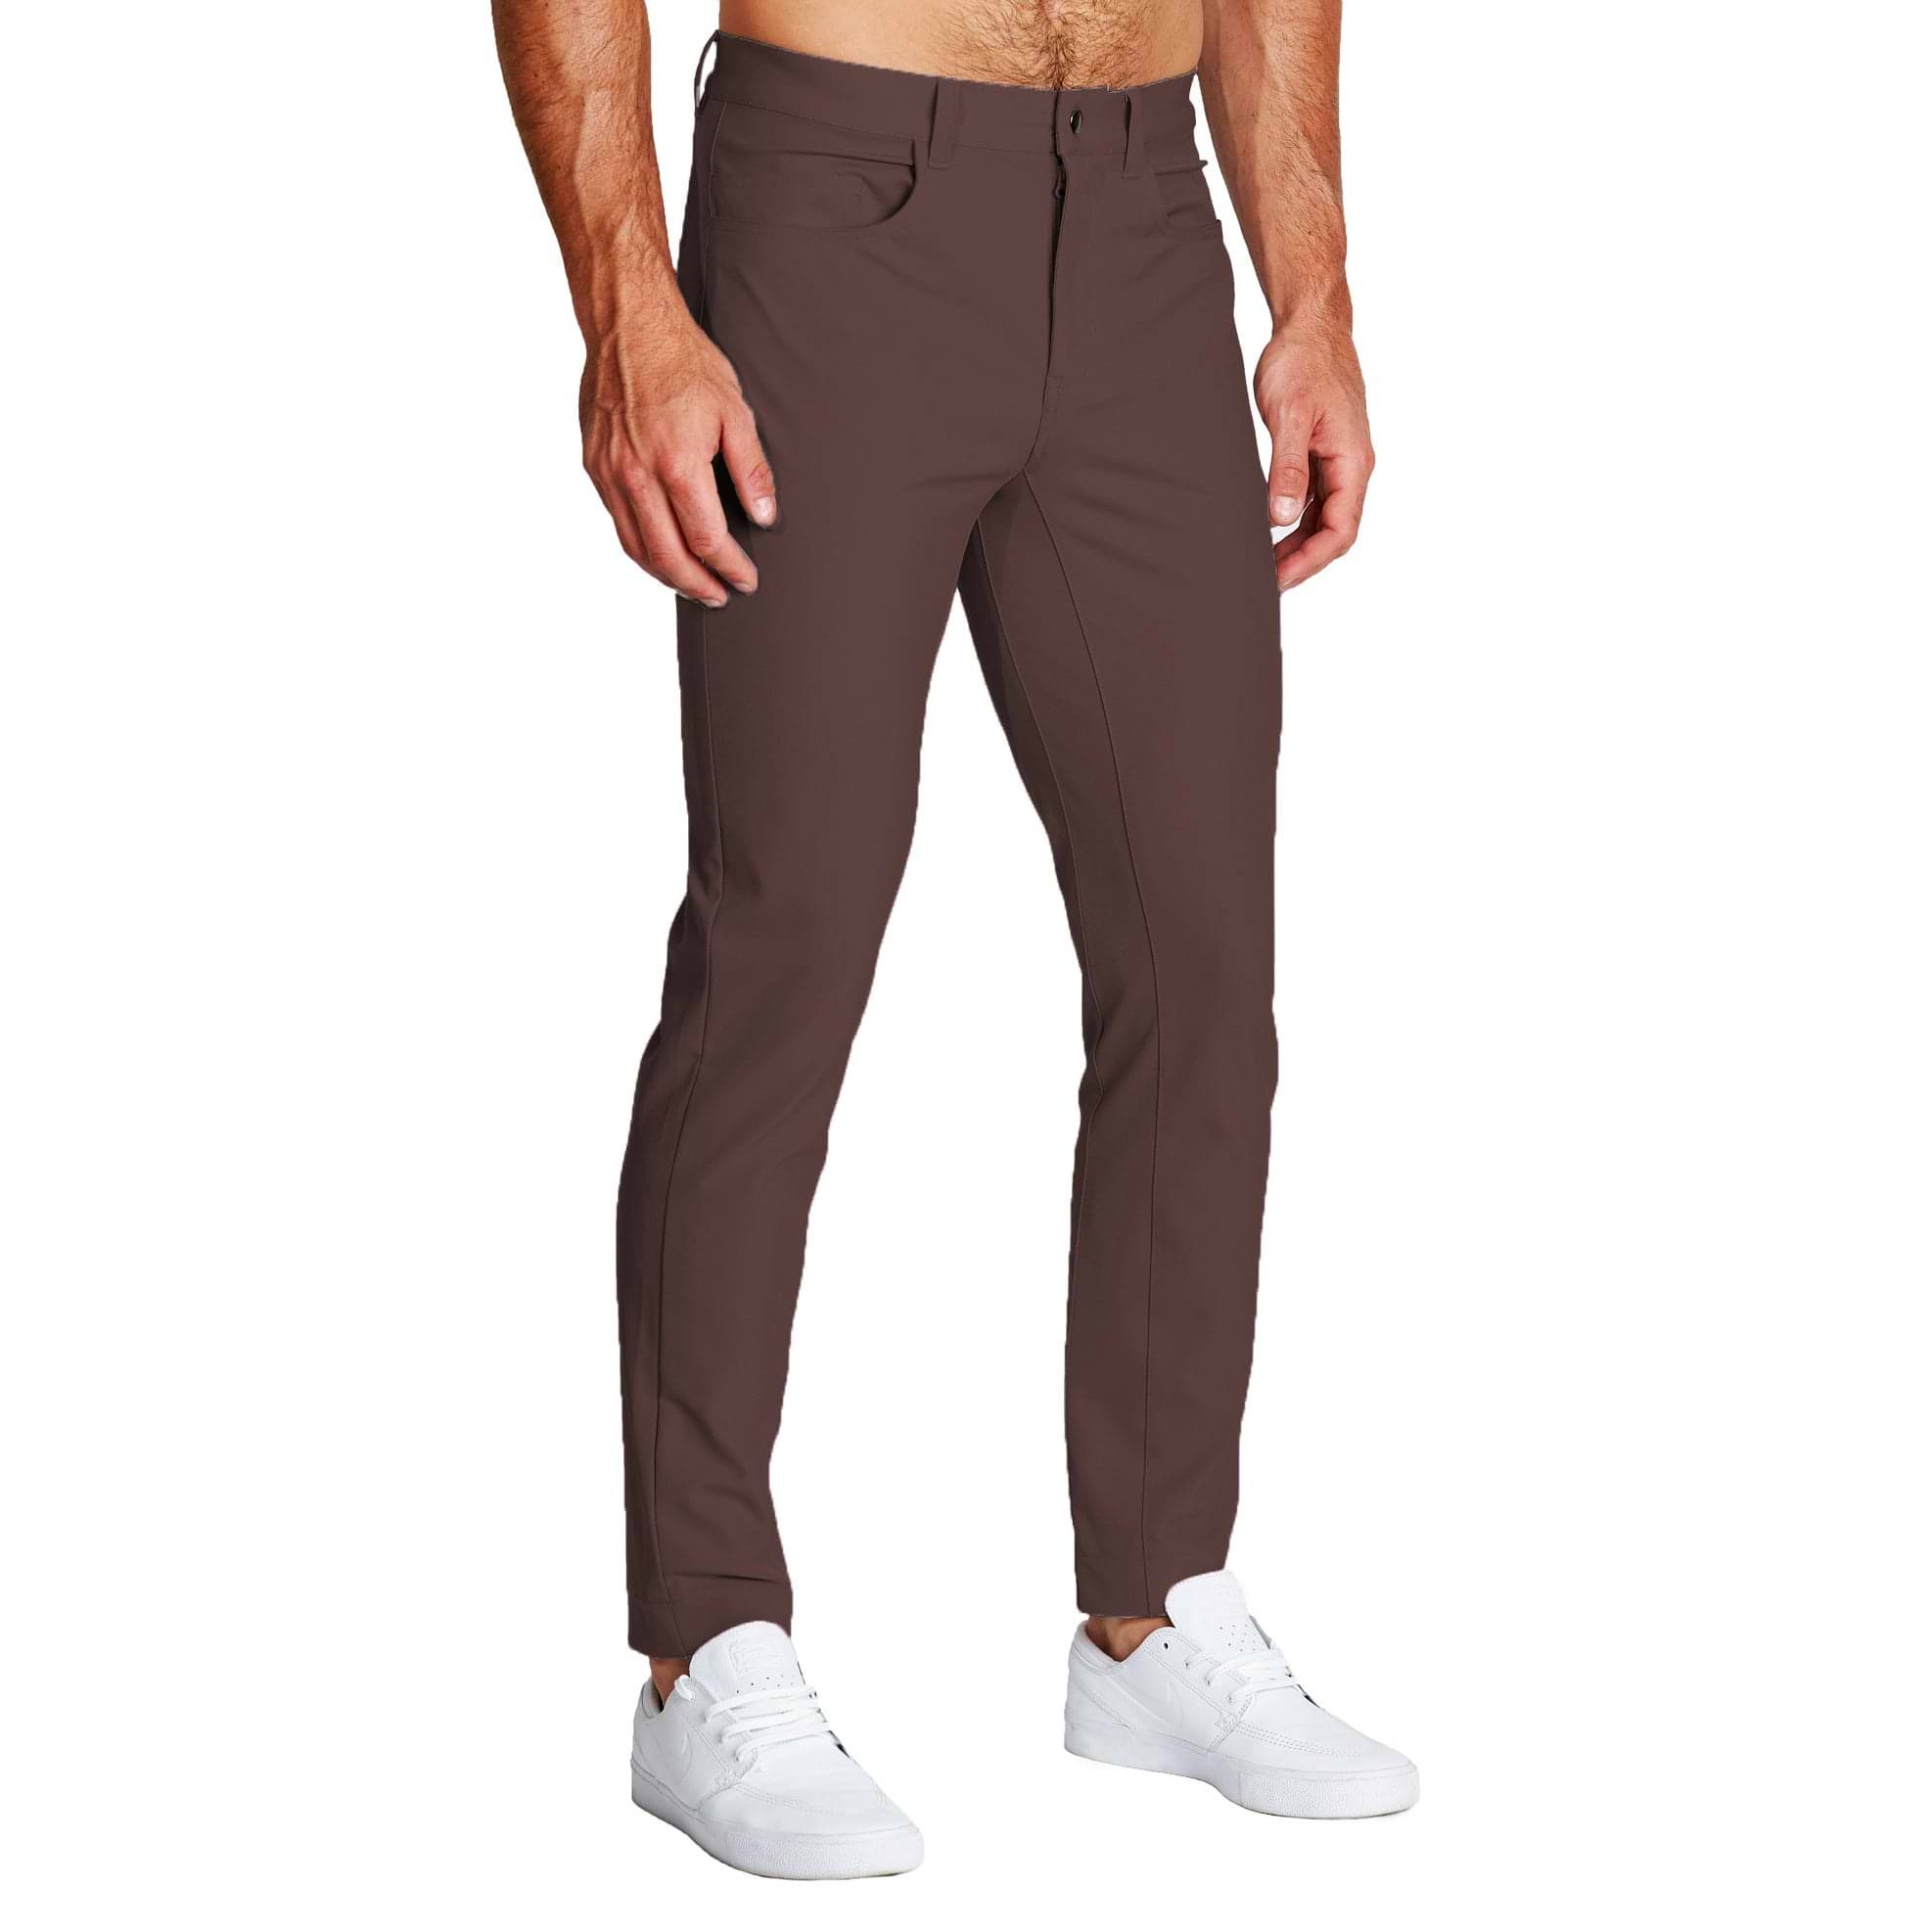 Fitness Pants Men China Trade,Buy China Direct From Fitness Pants Men  Factories at